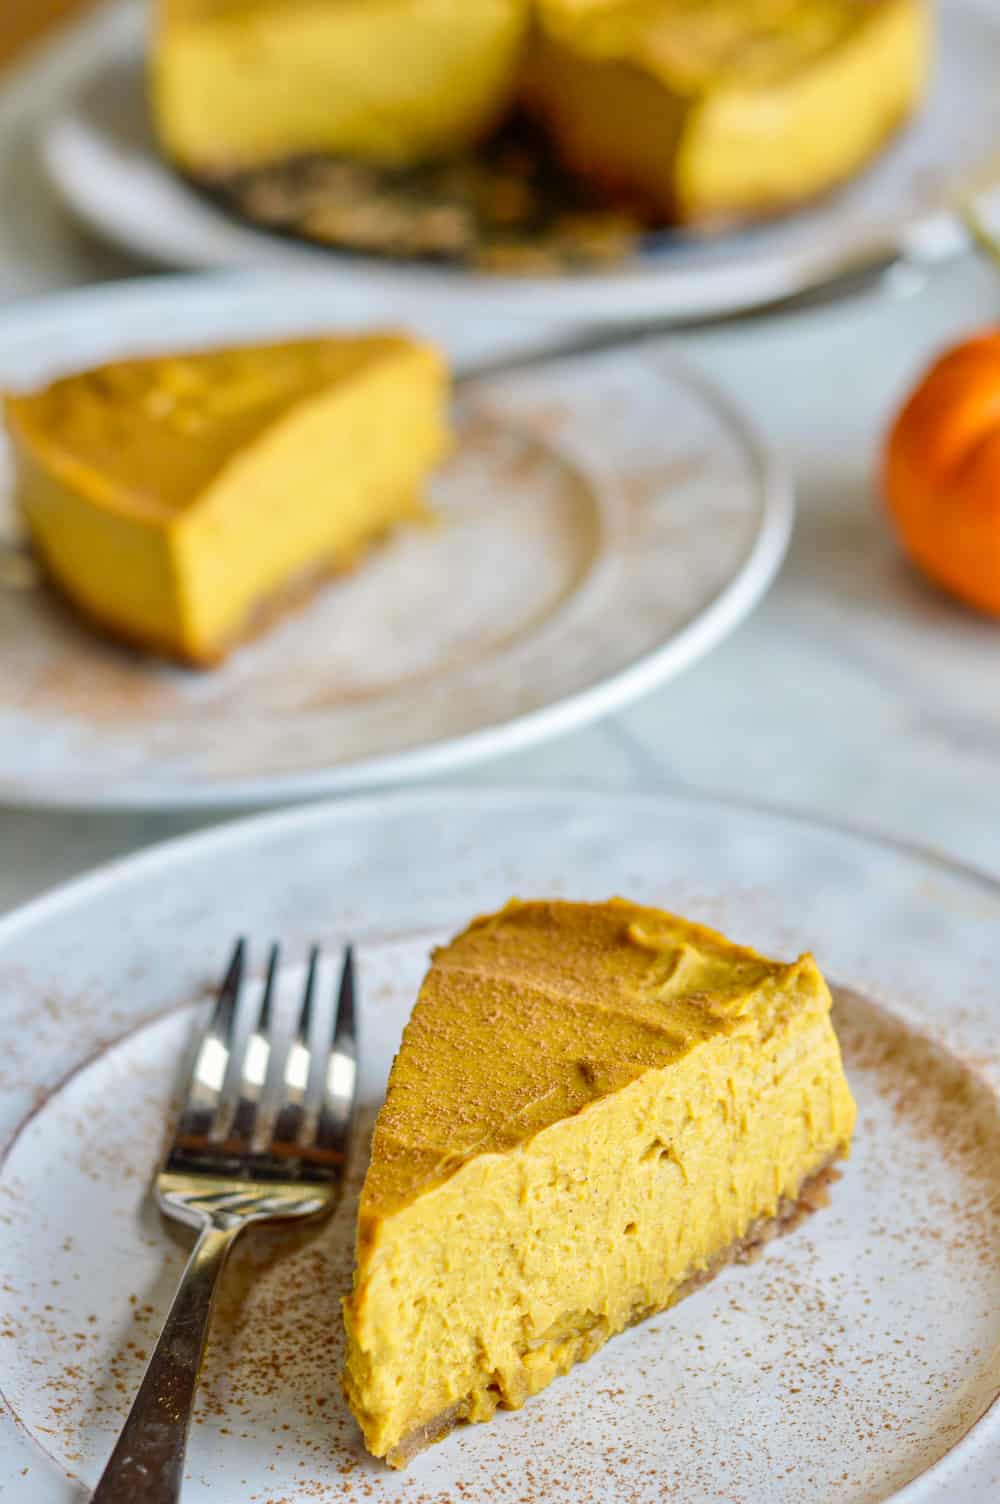 Creamy Paleo Pumpkin Cheesecake 2 slices from whole